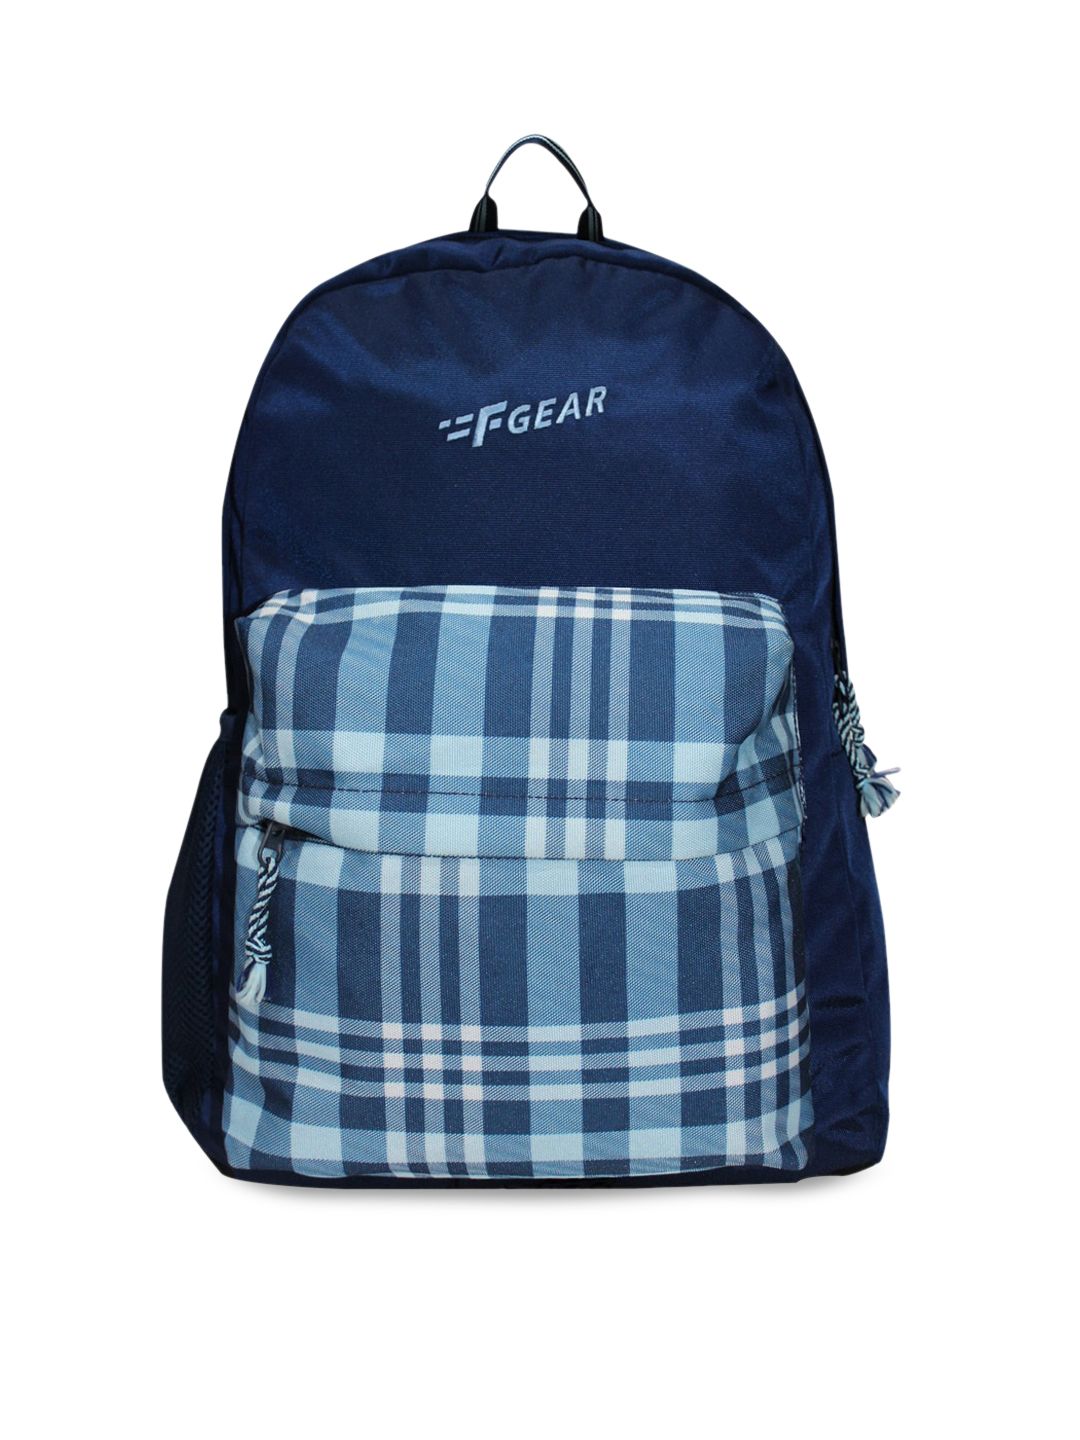 F Gear Unisex Navy Blue & Blue Geometric Backpack Price in India